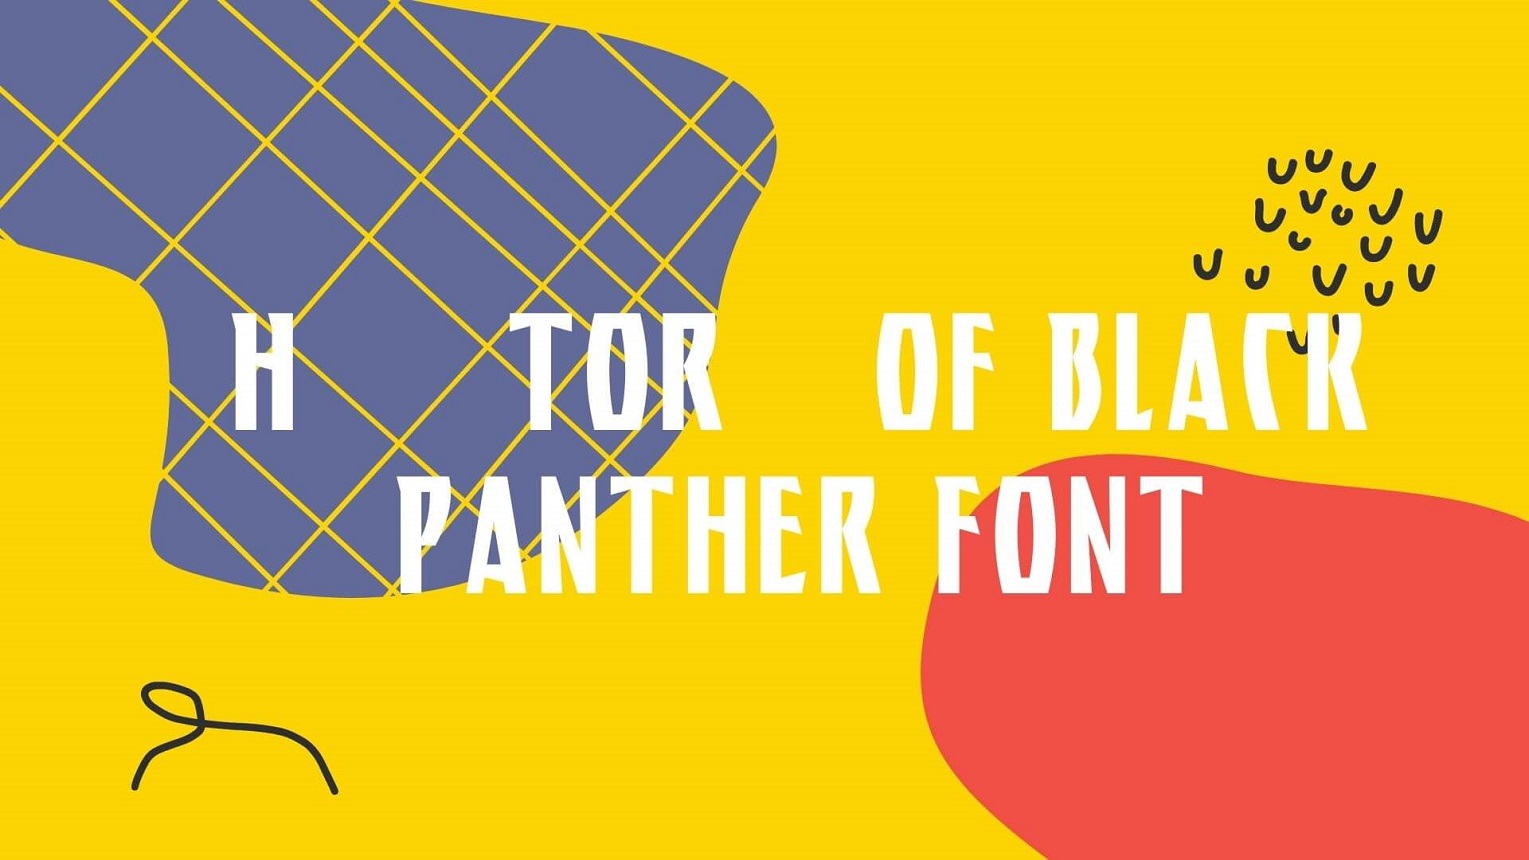 History of Black Panther Font